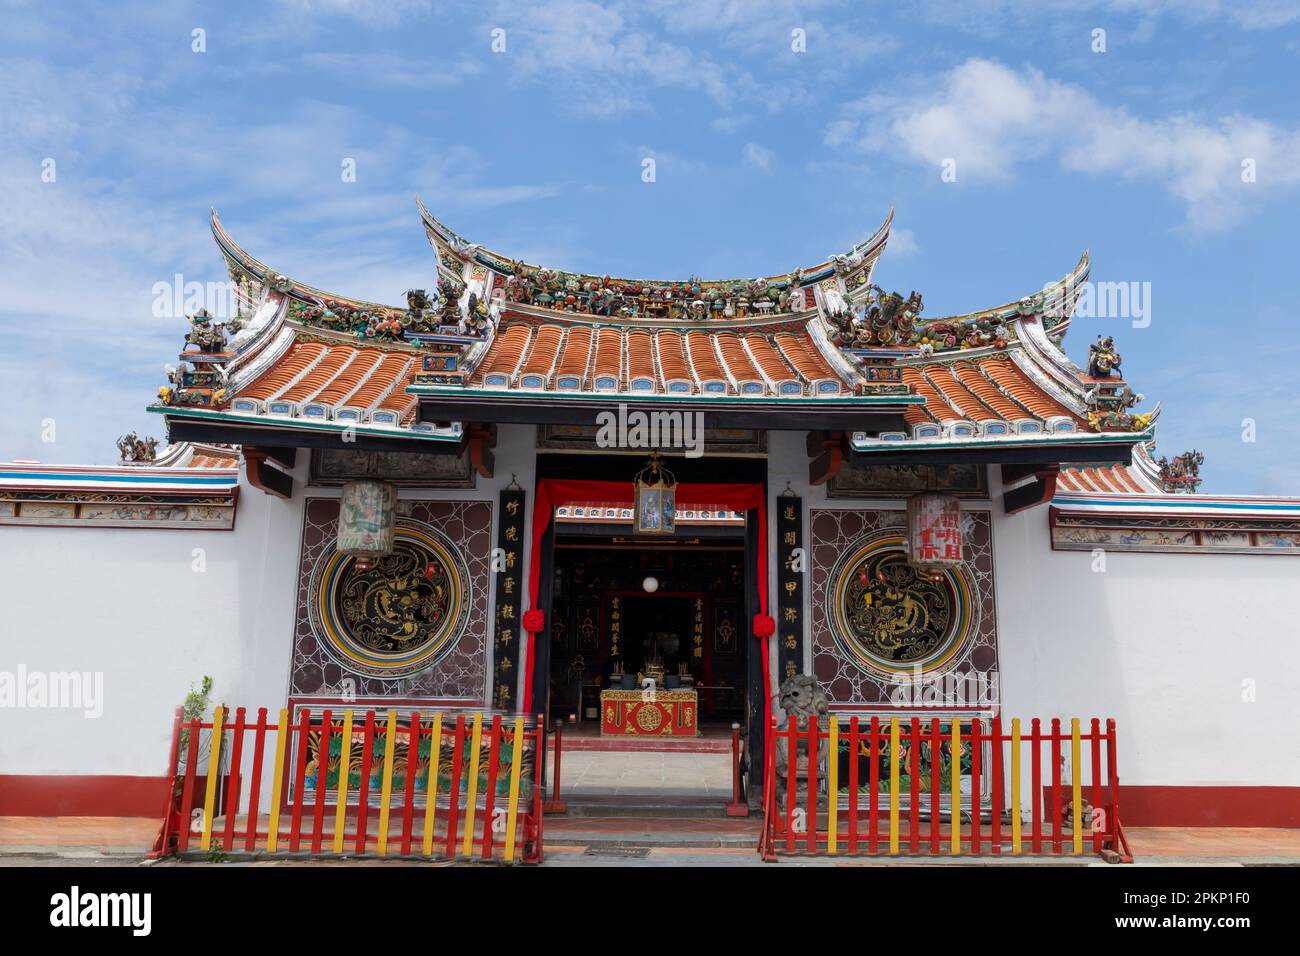 Cheng Hoon Teng Temple - Chinese temple in Malacca, Malaysia Stock Photo